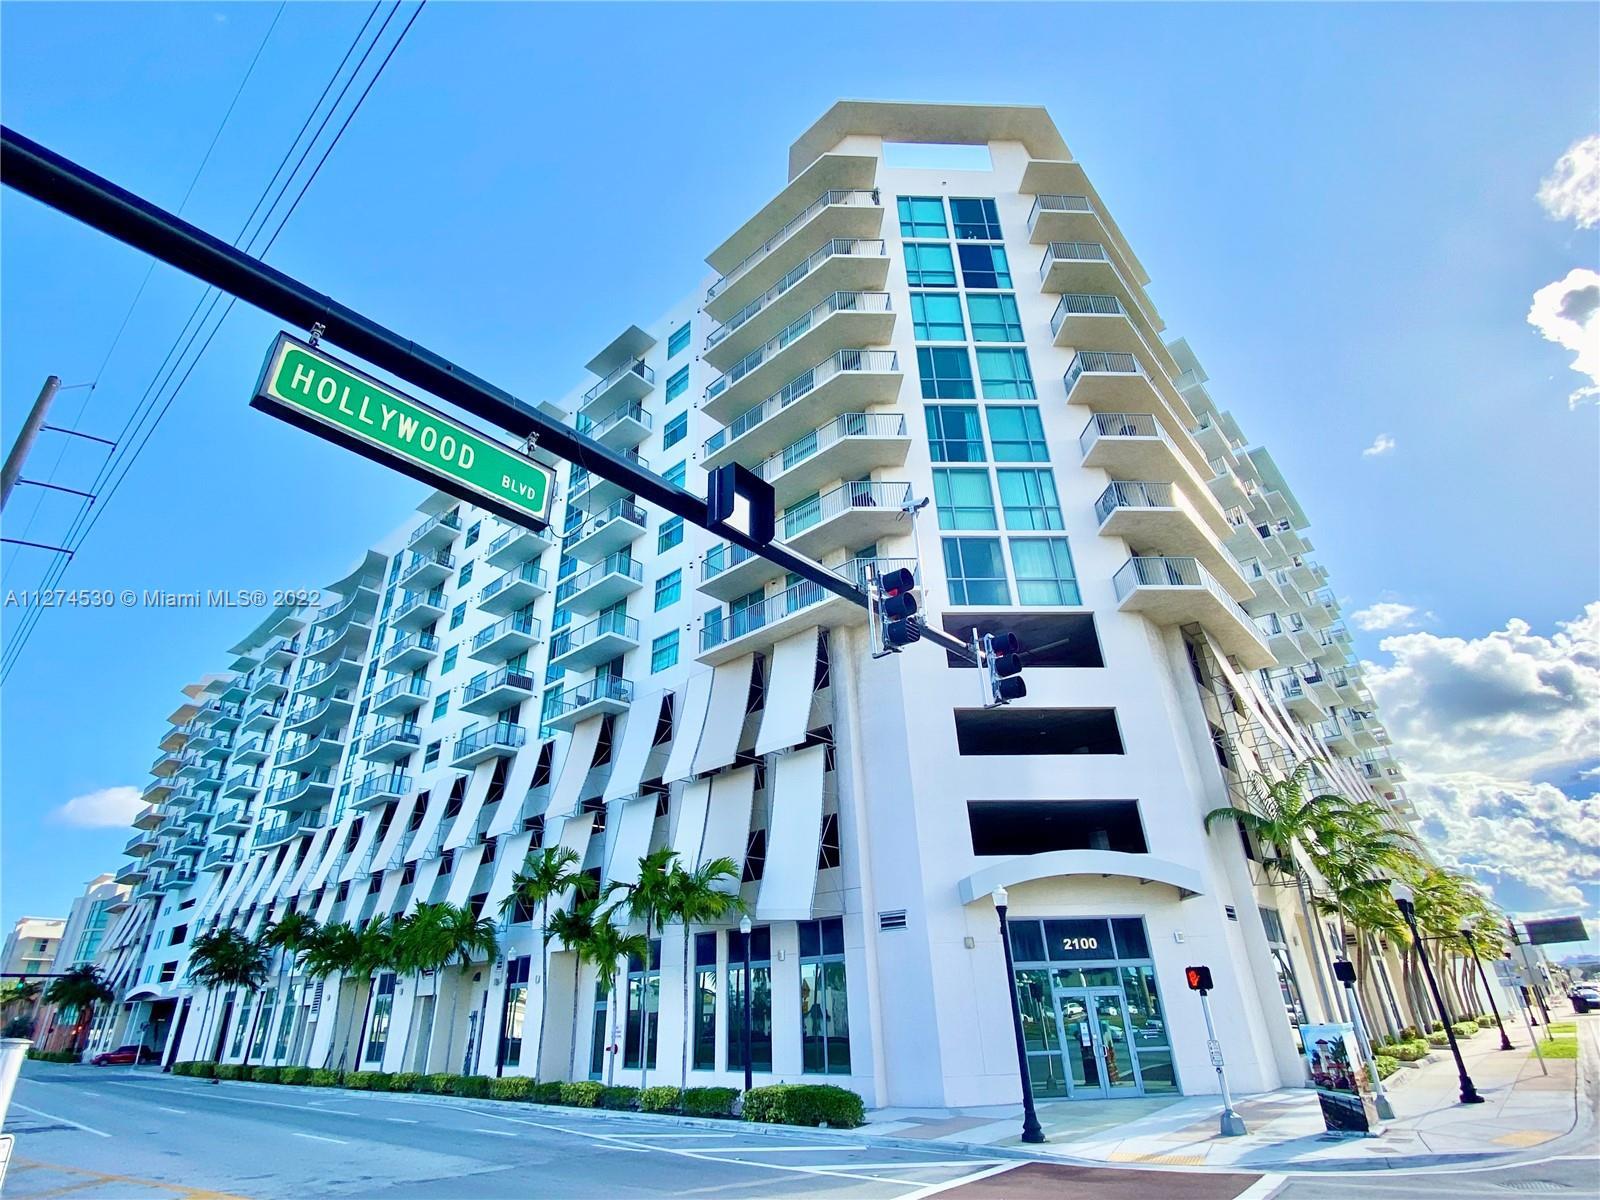 FOR SALE, comfortable and strategically located apartment in the heart of downtown Hollywood. Hollyw